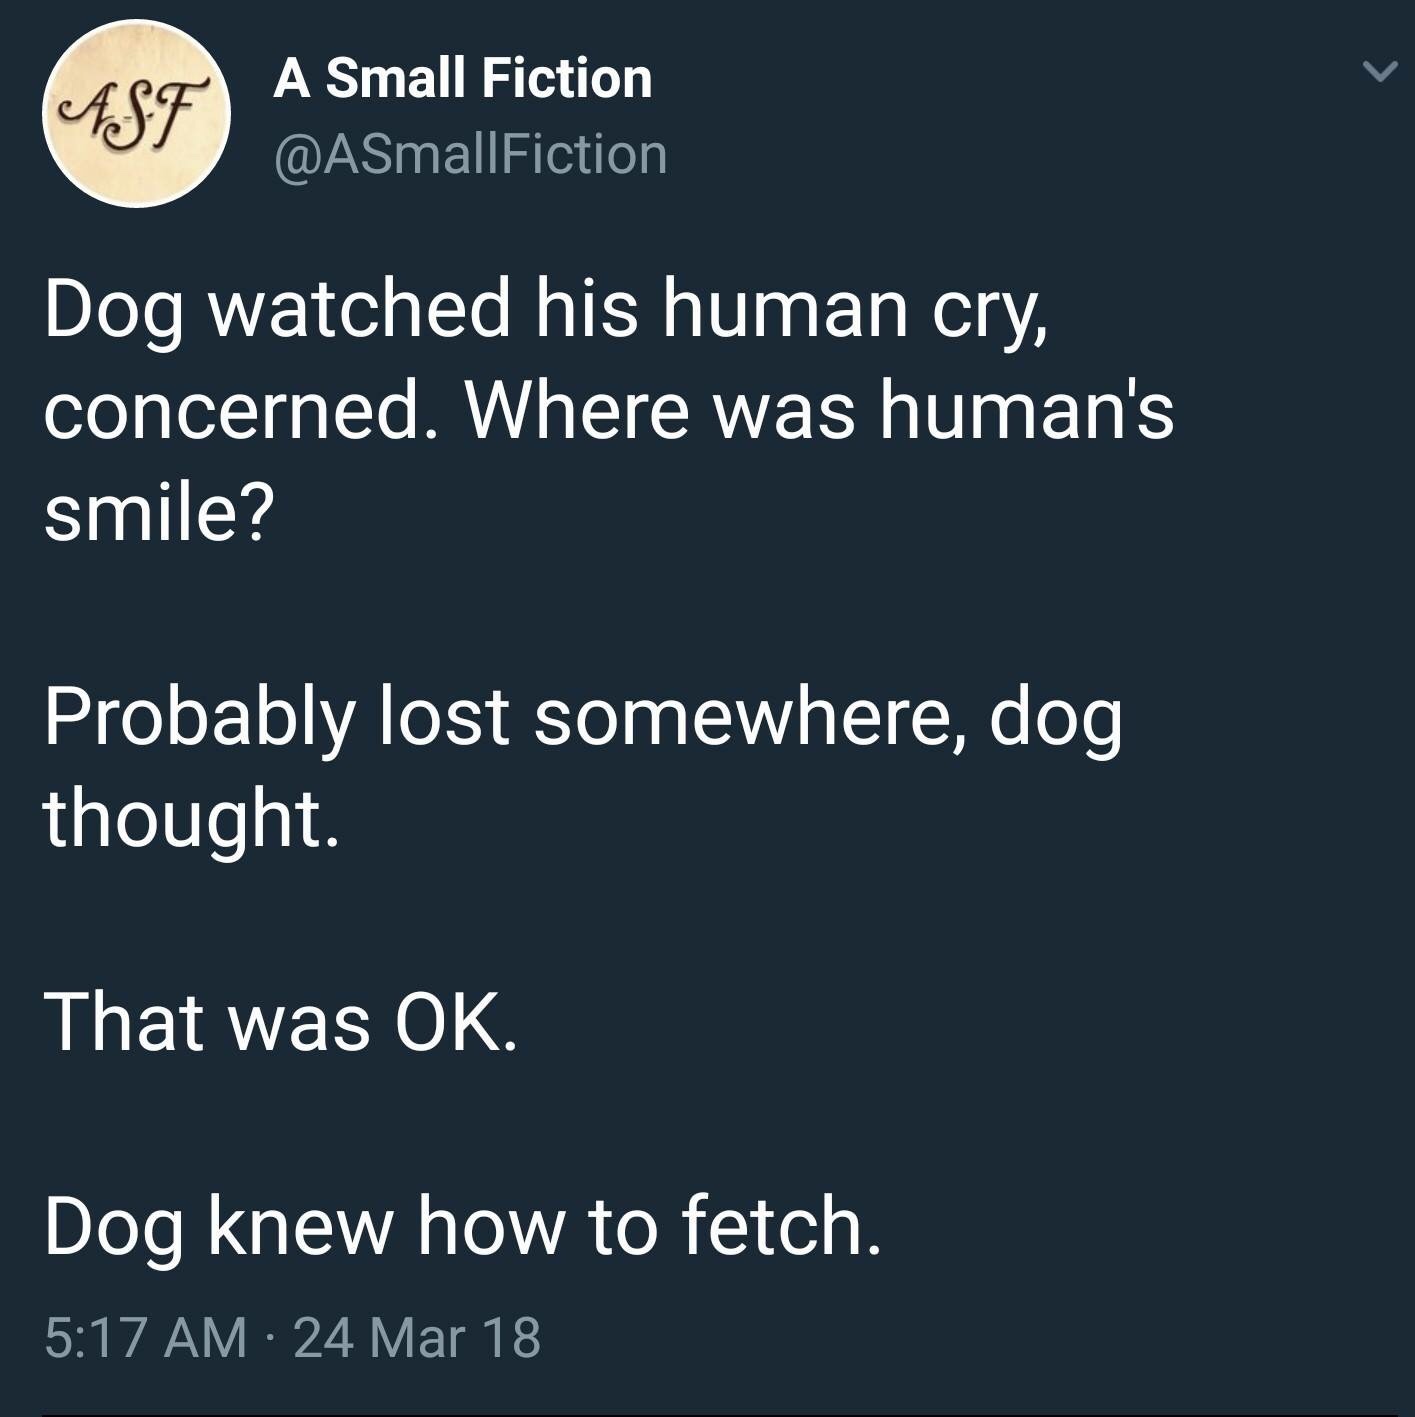 memes - Ale A Small Fiction Dog watched his human cry, concerned. Where was human's smile? Probably lost somewhere, dog thought. That was Ok. Dog knew how to fetch. 24 Mar 18